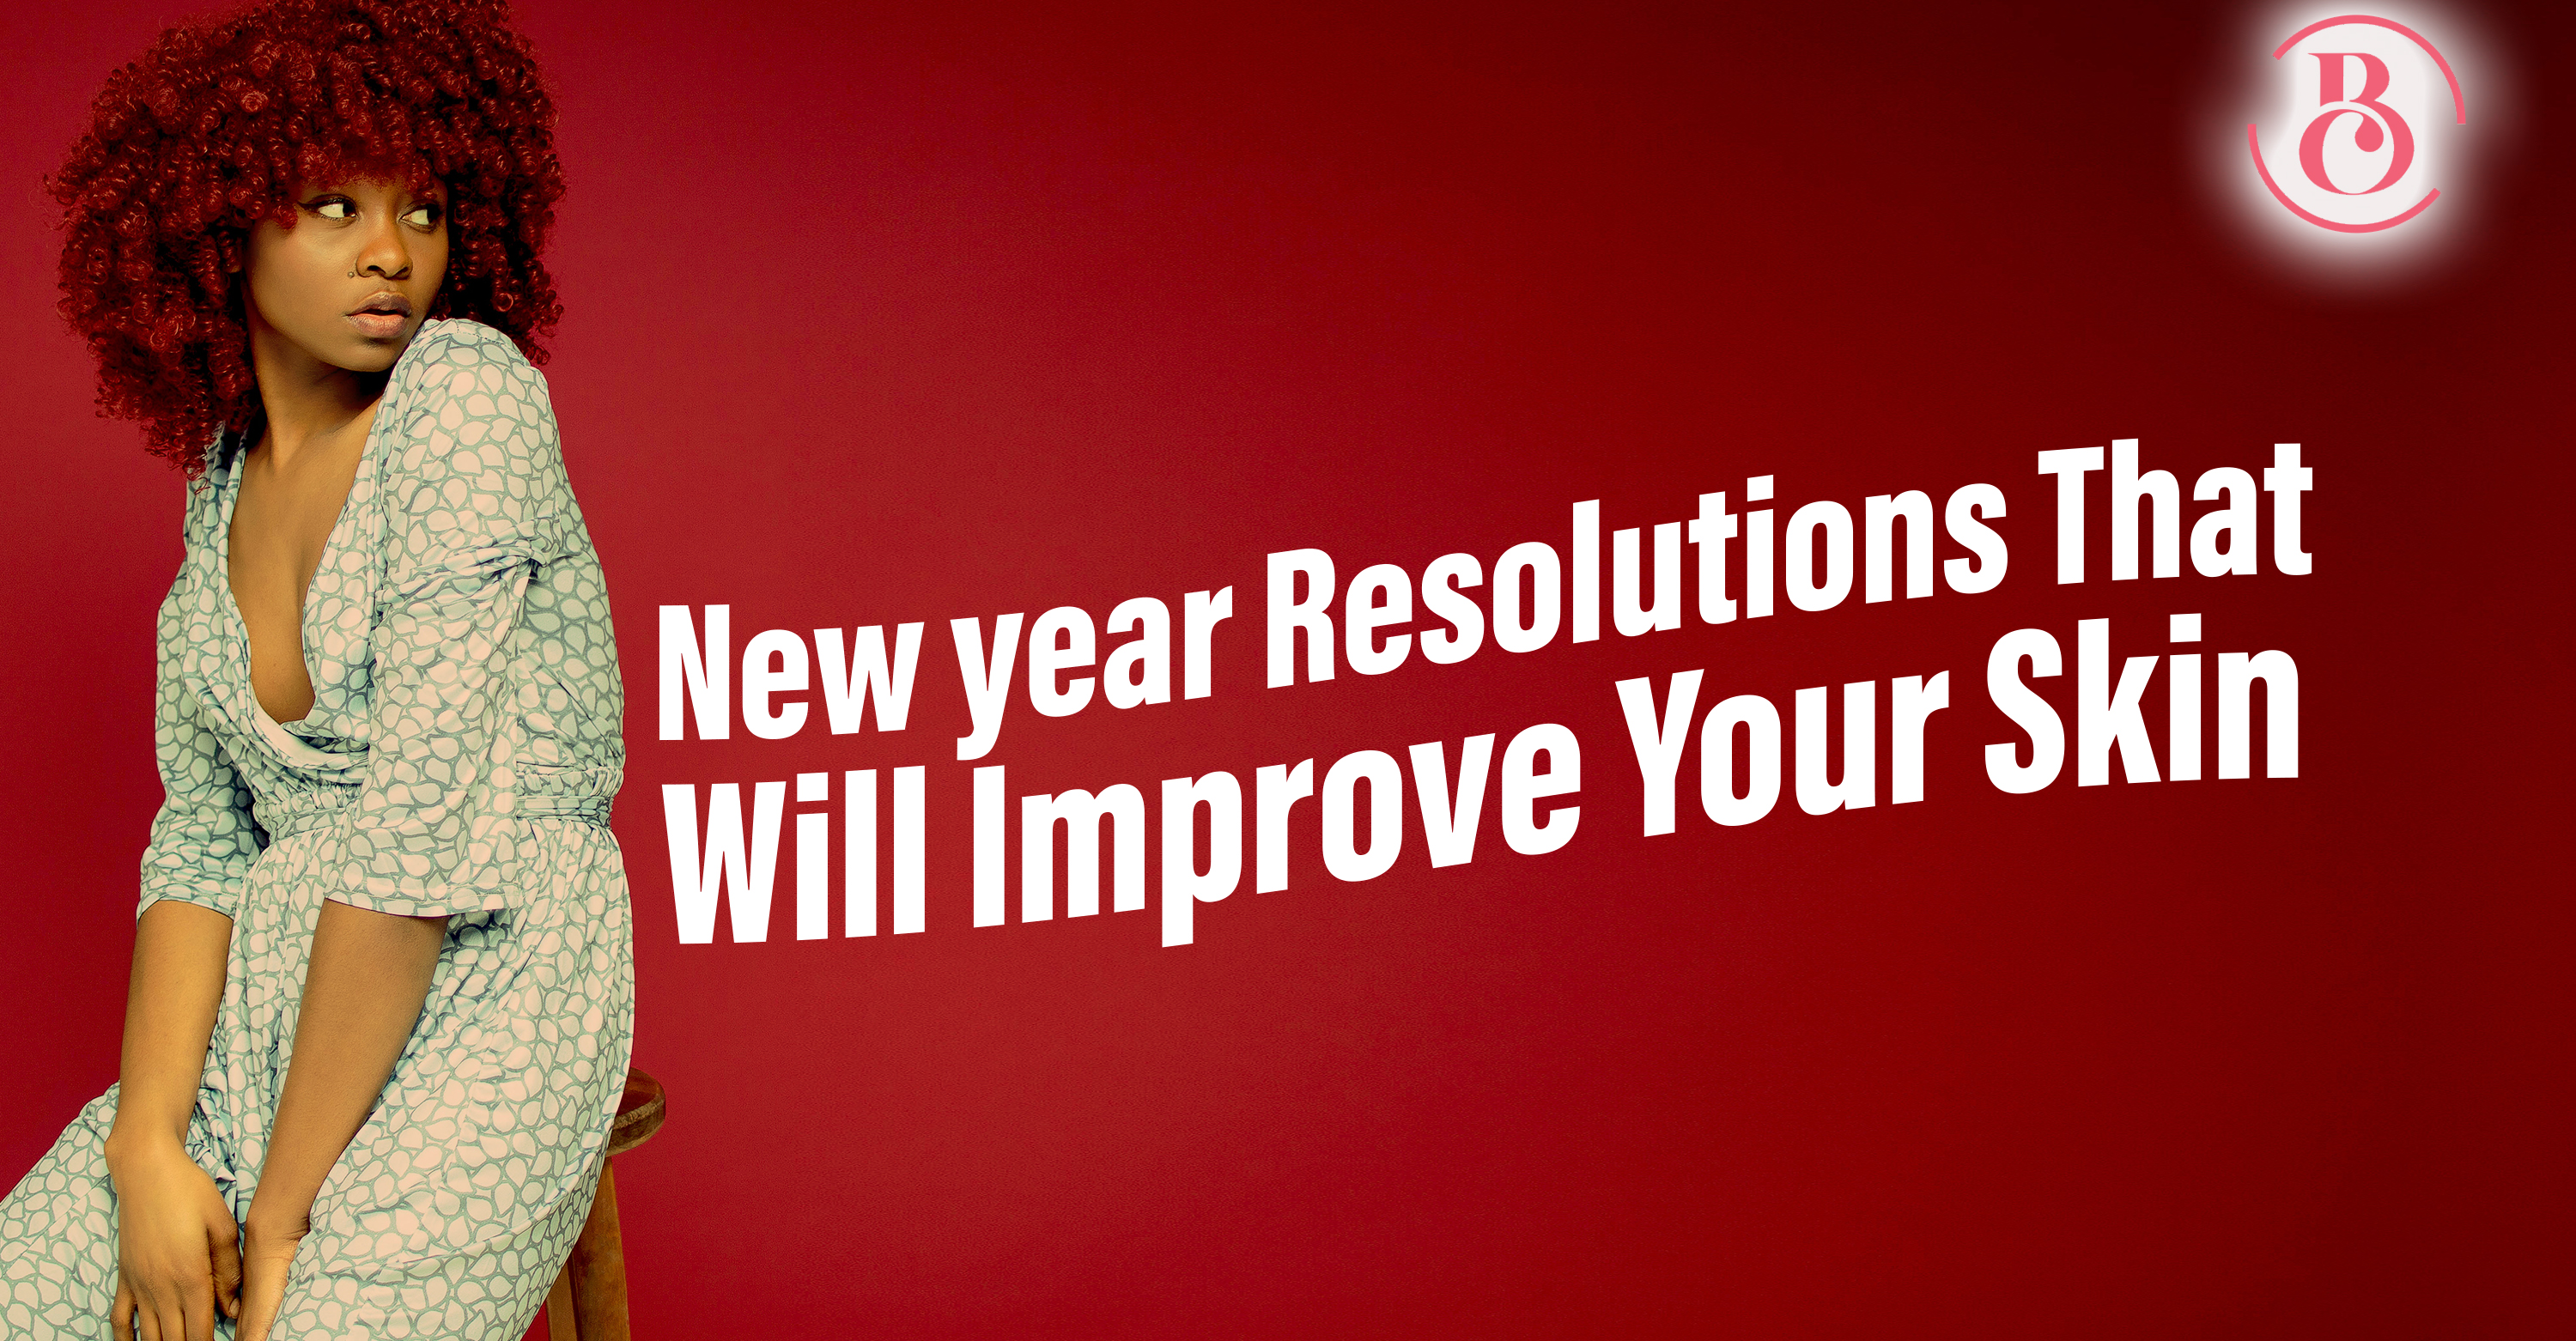 8 New Year Resolutions That Will Improve Your Skin